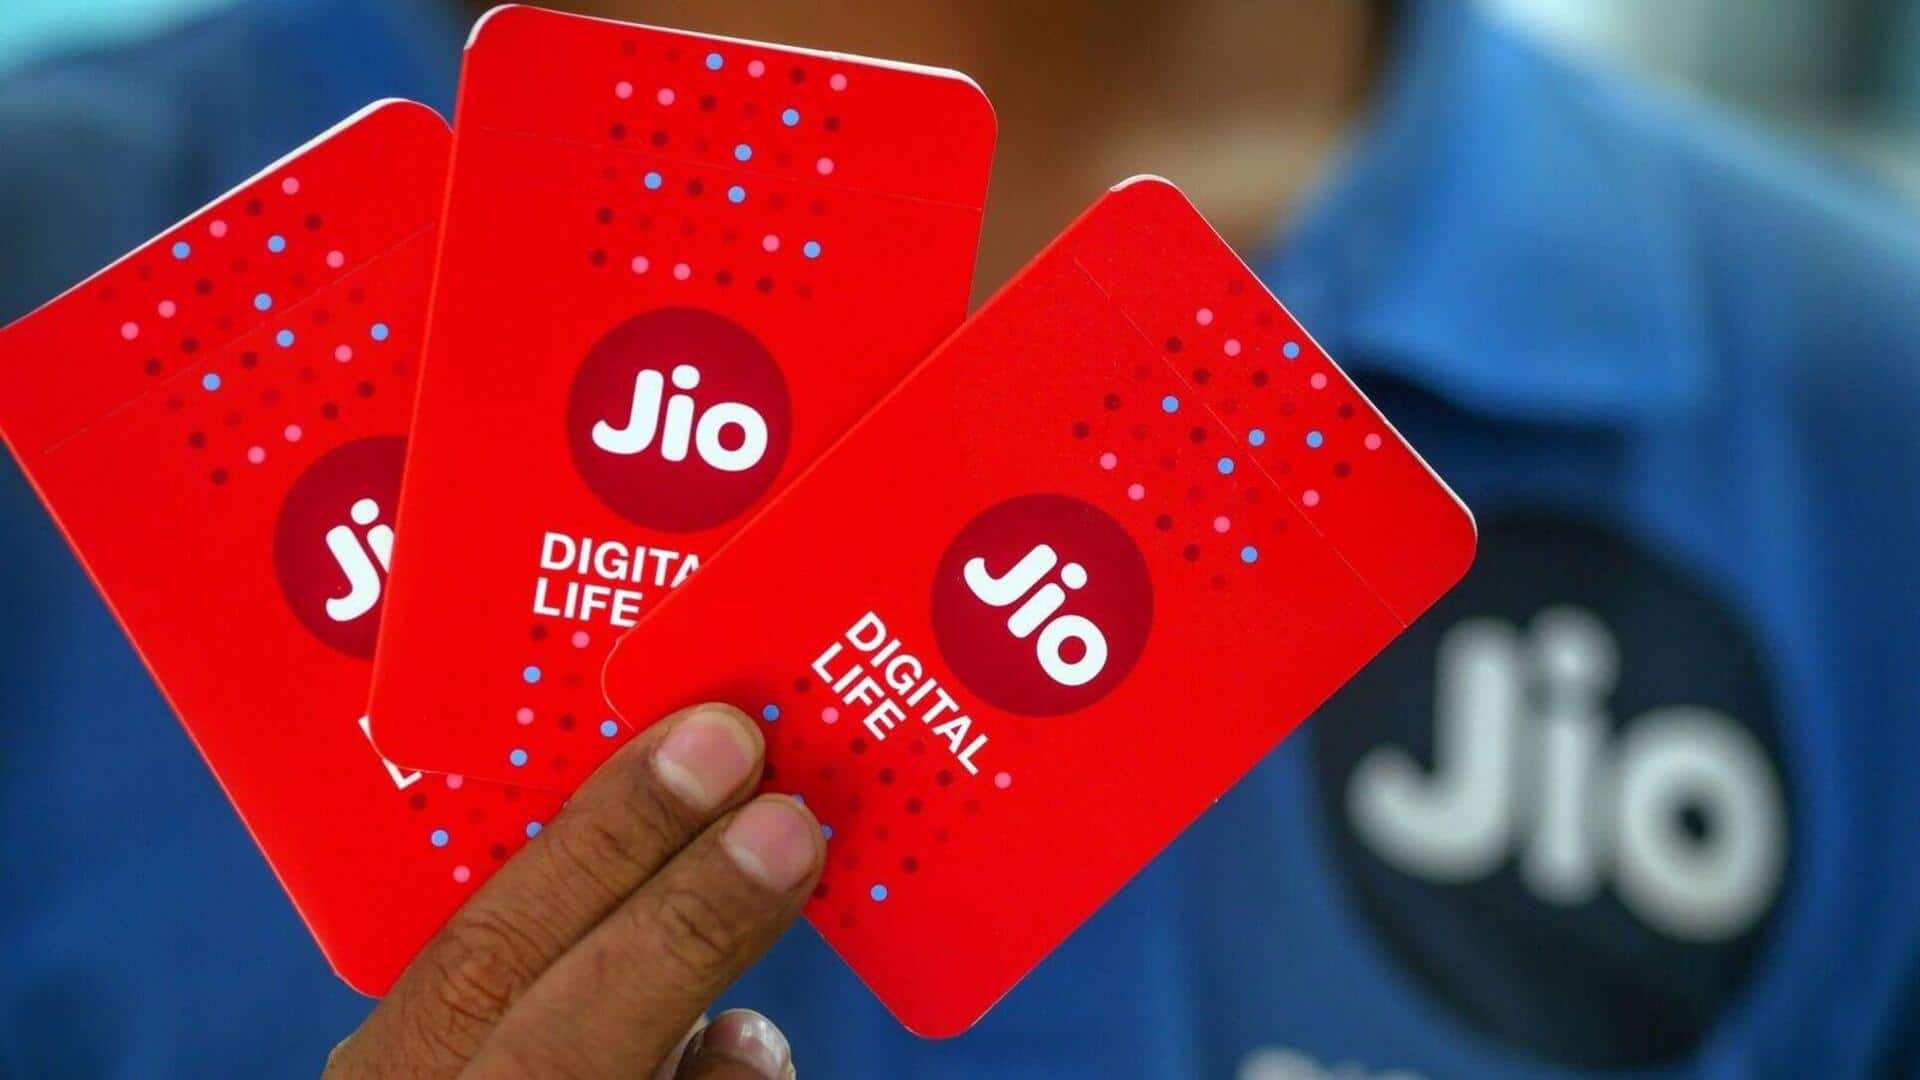 Jio surpasses China Mobile to become world's largest mobile operator